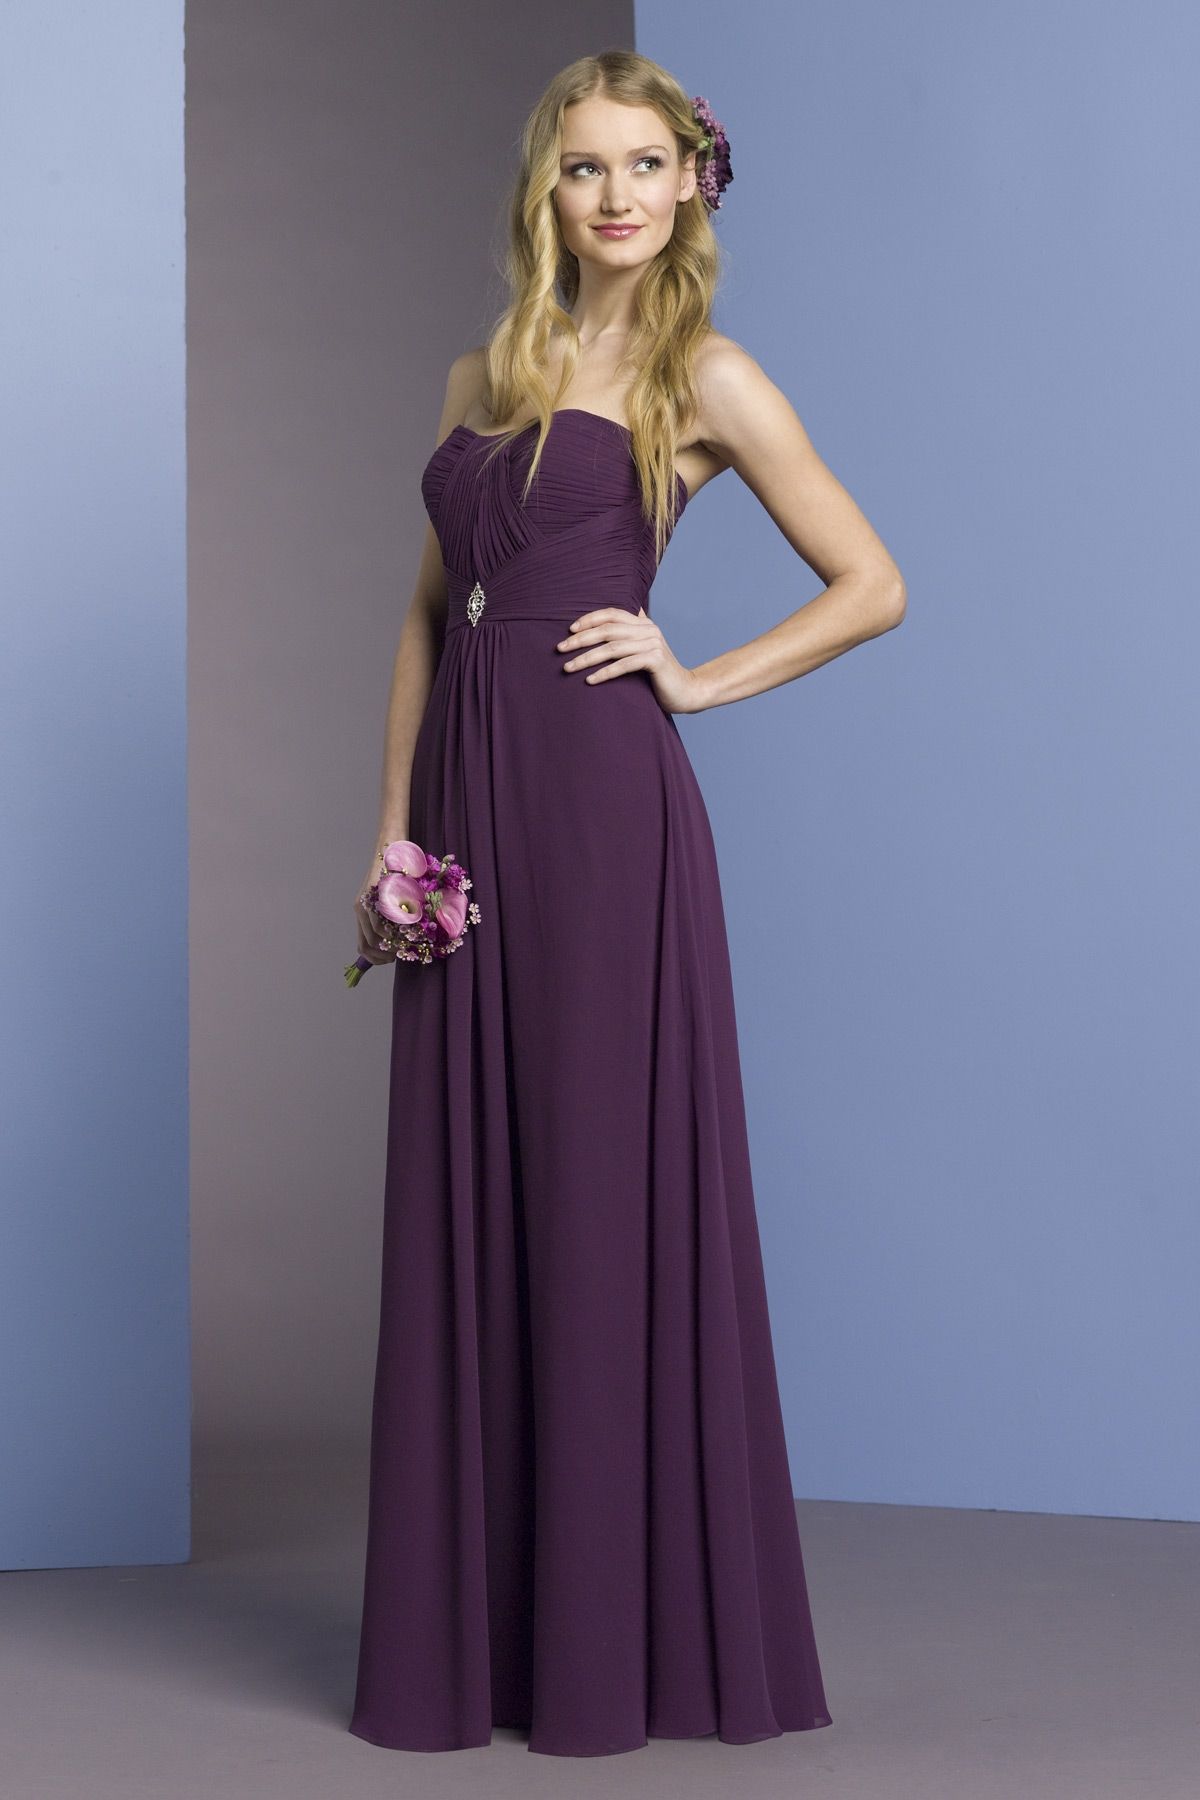 Strapless A-line chiffon bridesmaid dress. LOVE this color